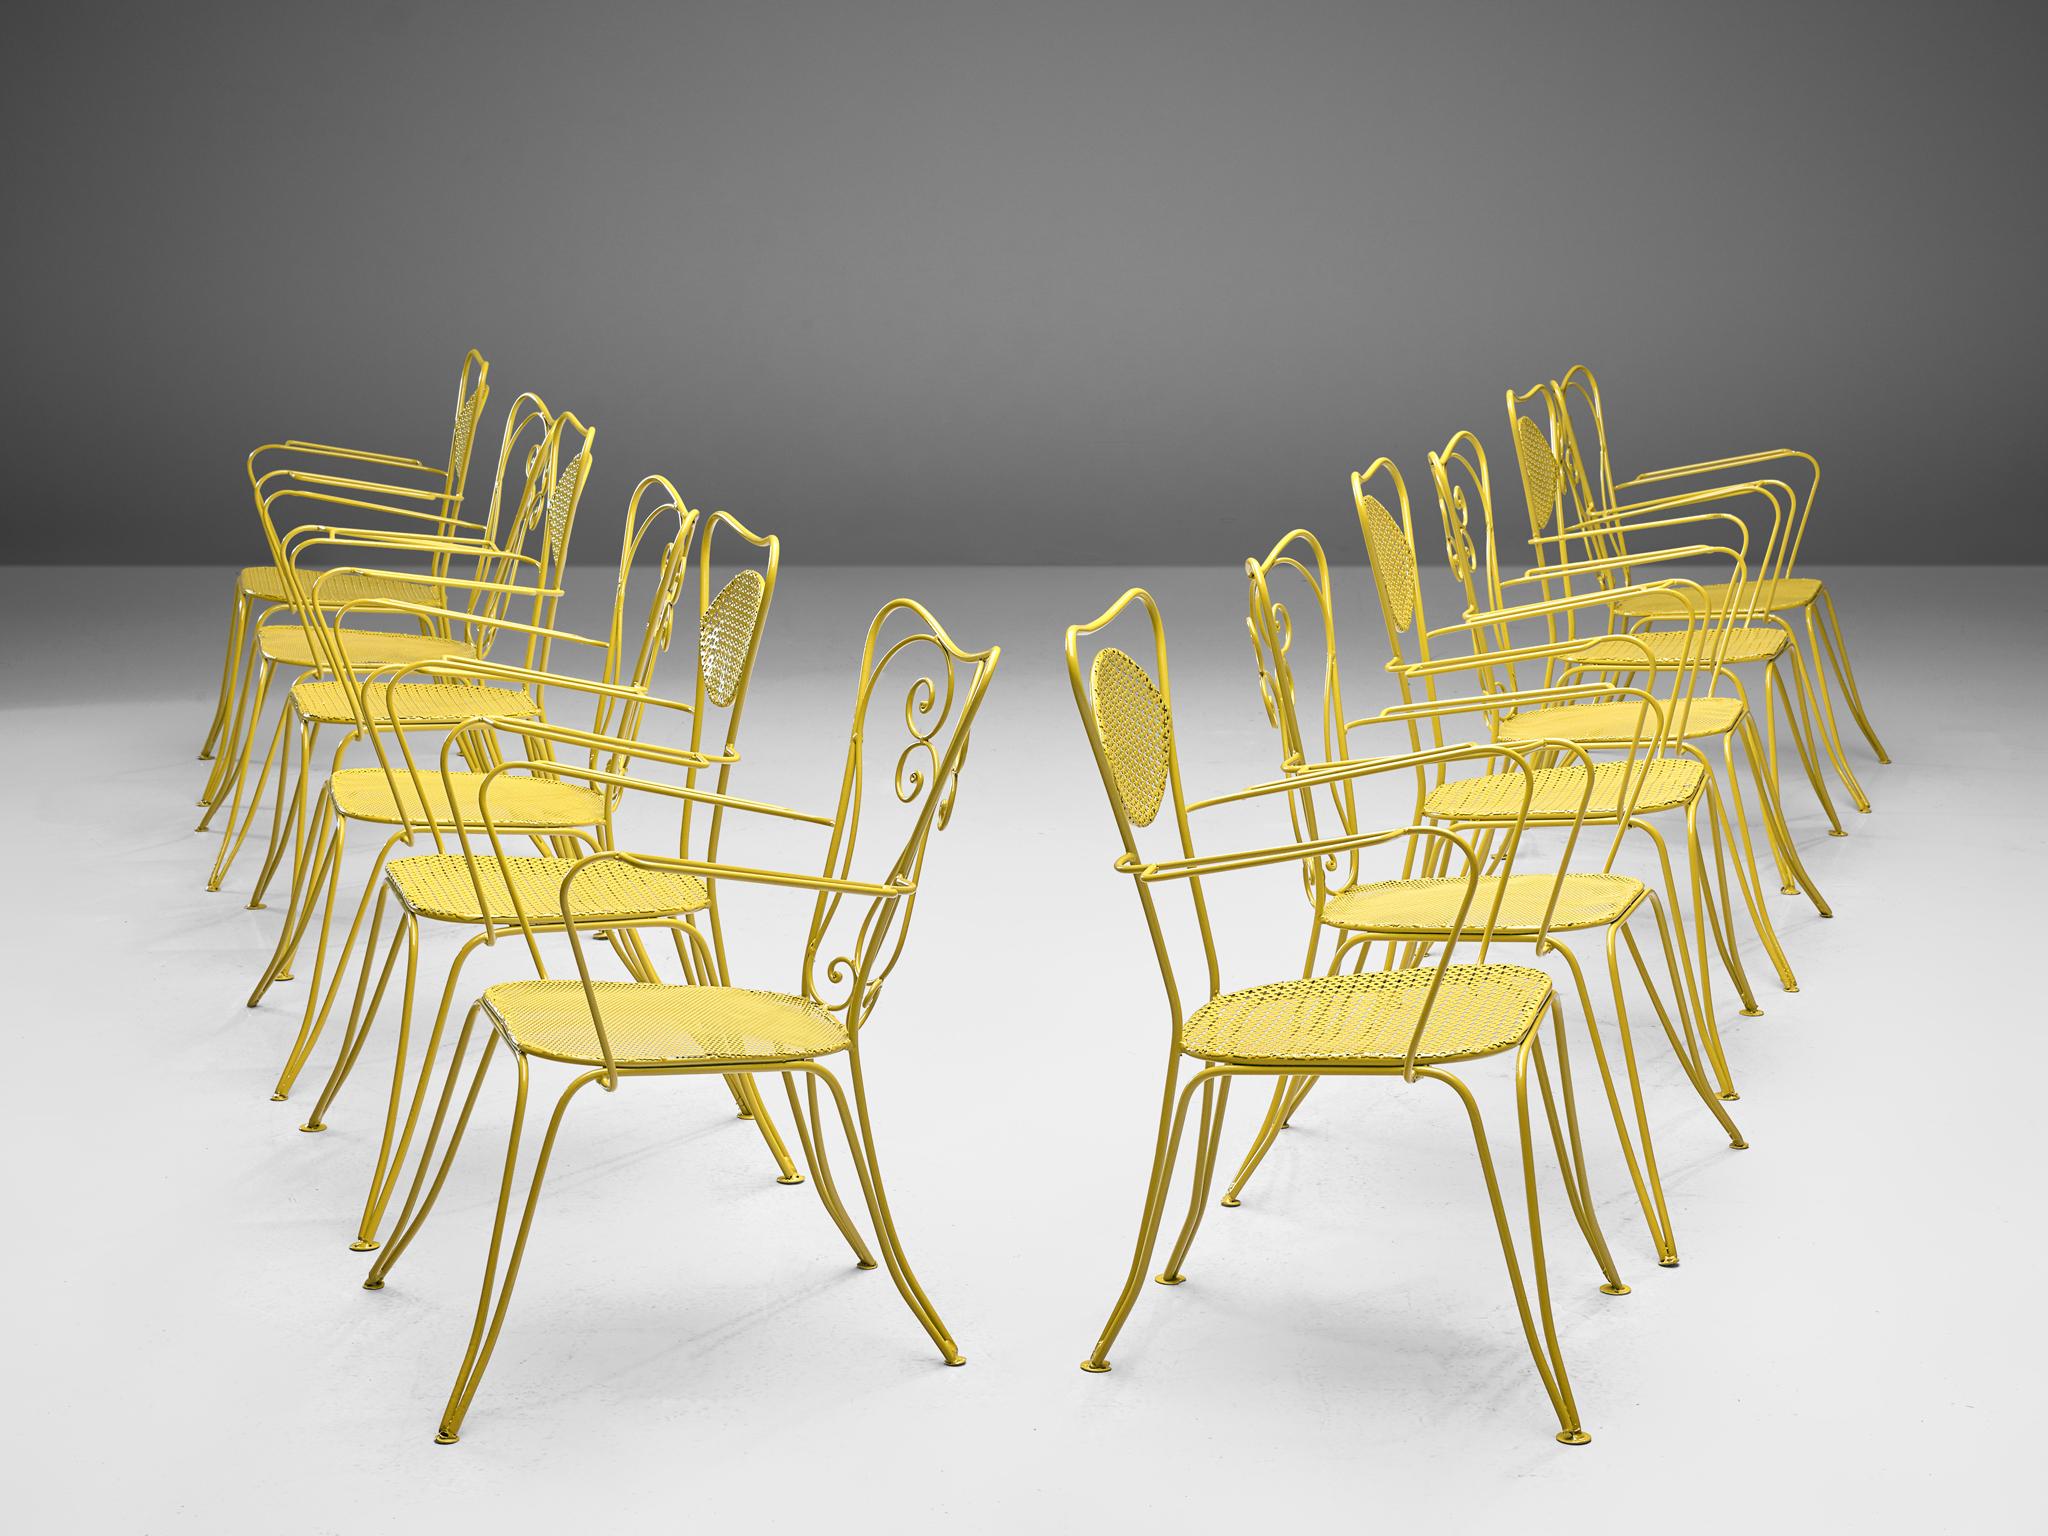 Large set of dining chairs, yellow colored metal, Italy, 1960s

Very large set of metal chairs in a vibrant yellow color. The chairs have an elegant, bold design, as is quintessential of Italian patio chairs. Curved shapes and thin armrests form the